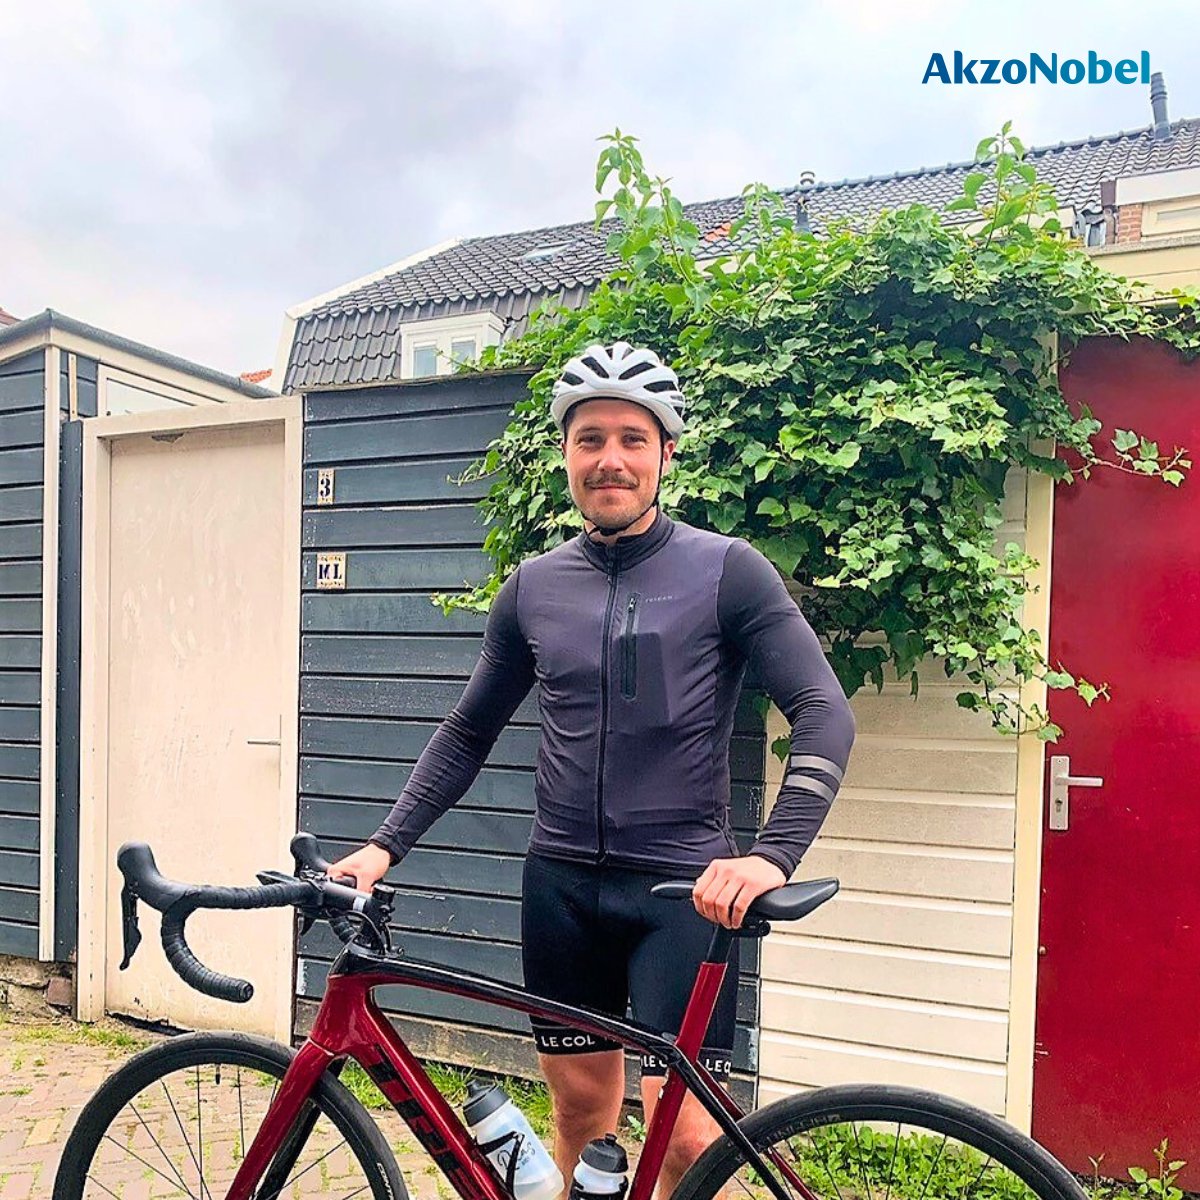 On World Bicycle Day, we celebrate @AkzoNobel's colleagues, Anthony Delorme (FR); Thomas Delorme (NL); and John Morphet (UK). They’re busy training for l’Étape du Tour de France on July 9 – when they get to ride the same route as Stage 14 of the actual Tour de France.

#TDF2023